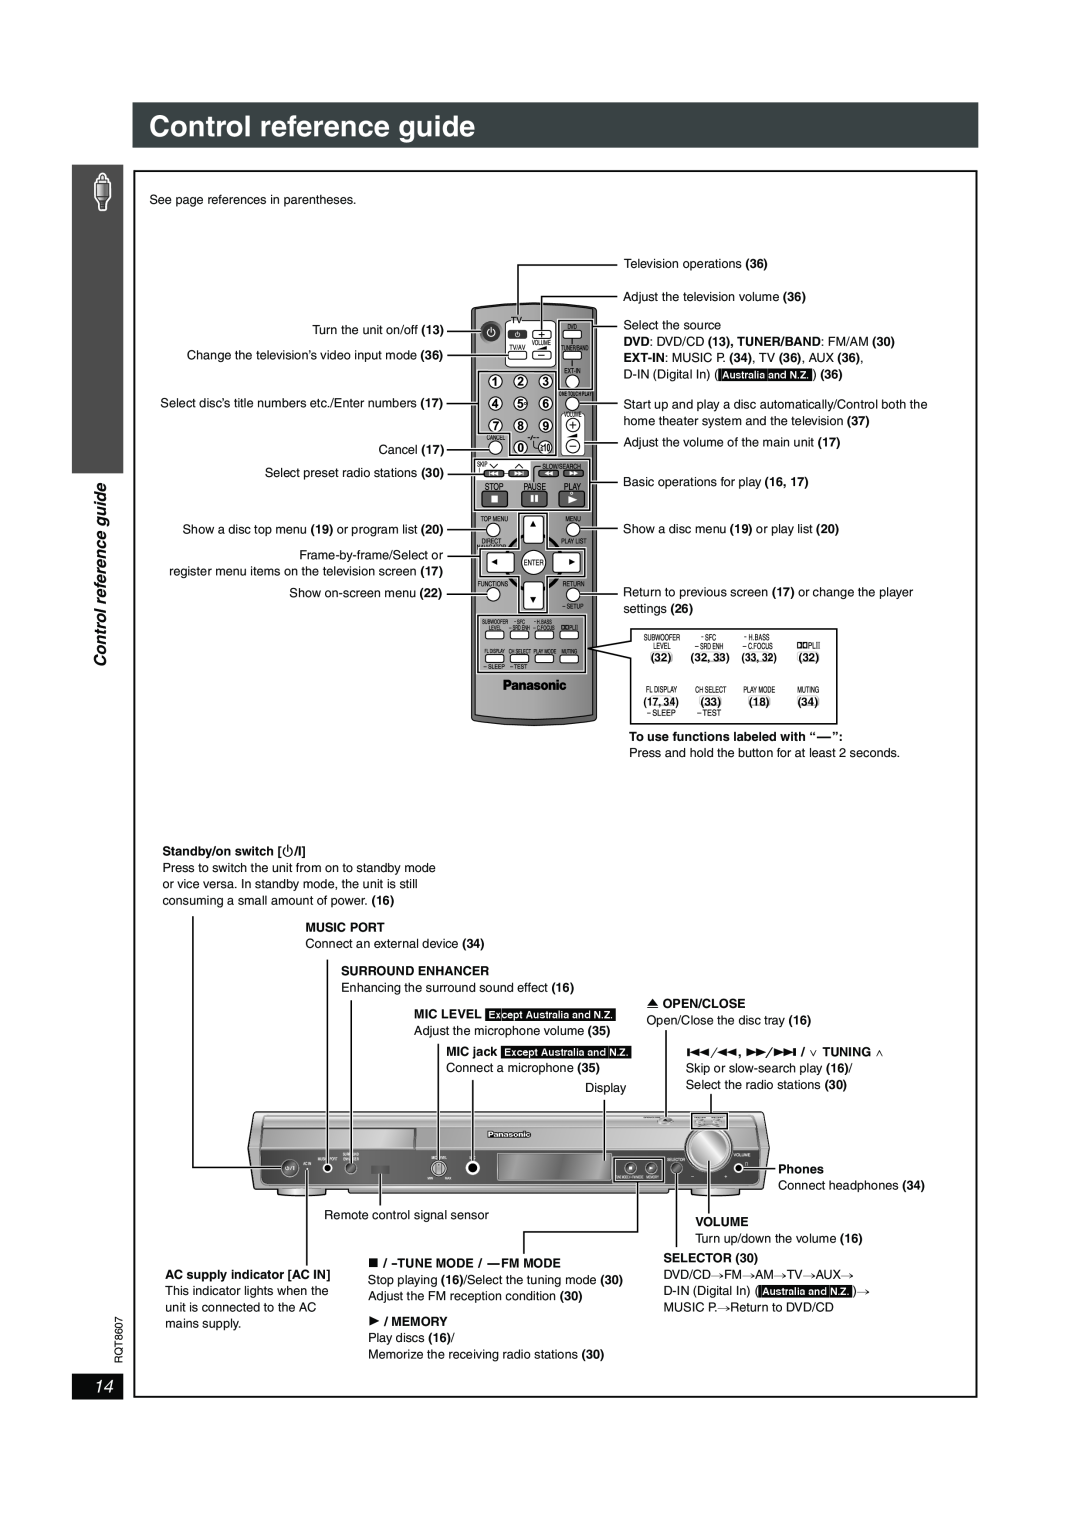 Panasonic SC-HT895 manual Control reference guide 